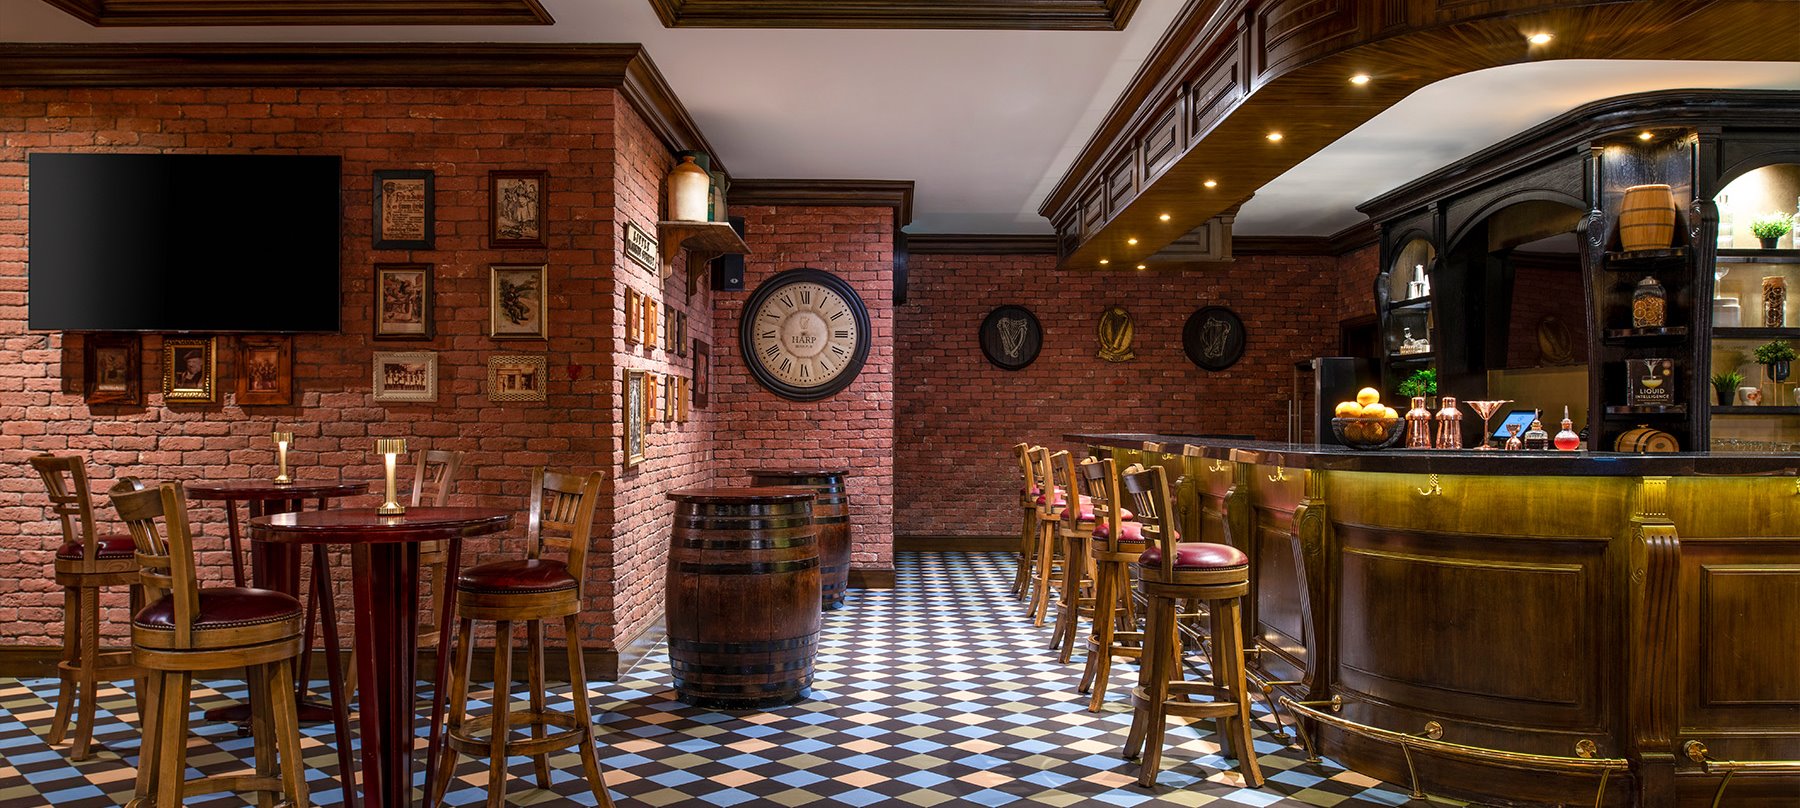 Bar interior. A checkered tile floor. Red brick walls, covered with pictures in old-style frames and illustrations of the Irish harp. A TV hangs on the wall in the left of the image. Two wooden tables with high chairs on the left, and two barrels that have been turned into tables in the centre. To the right is the bar itself, which is wooden, and has a brass foot rail and brass hooks for coats and bags. Five high chairs are lined up in front of the bar. A bowl of lemons sits on the bar next to cocktail-making equipment (shakers, a strainer and a jigger).